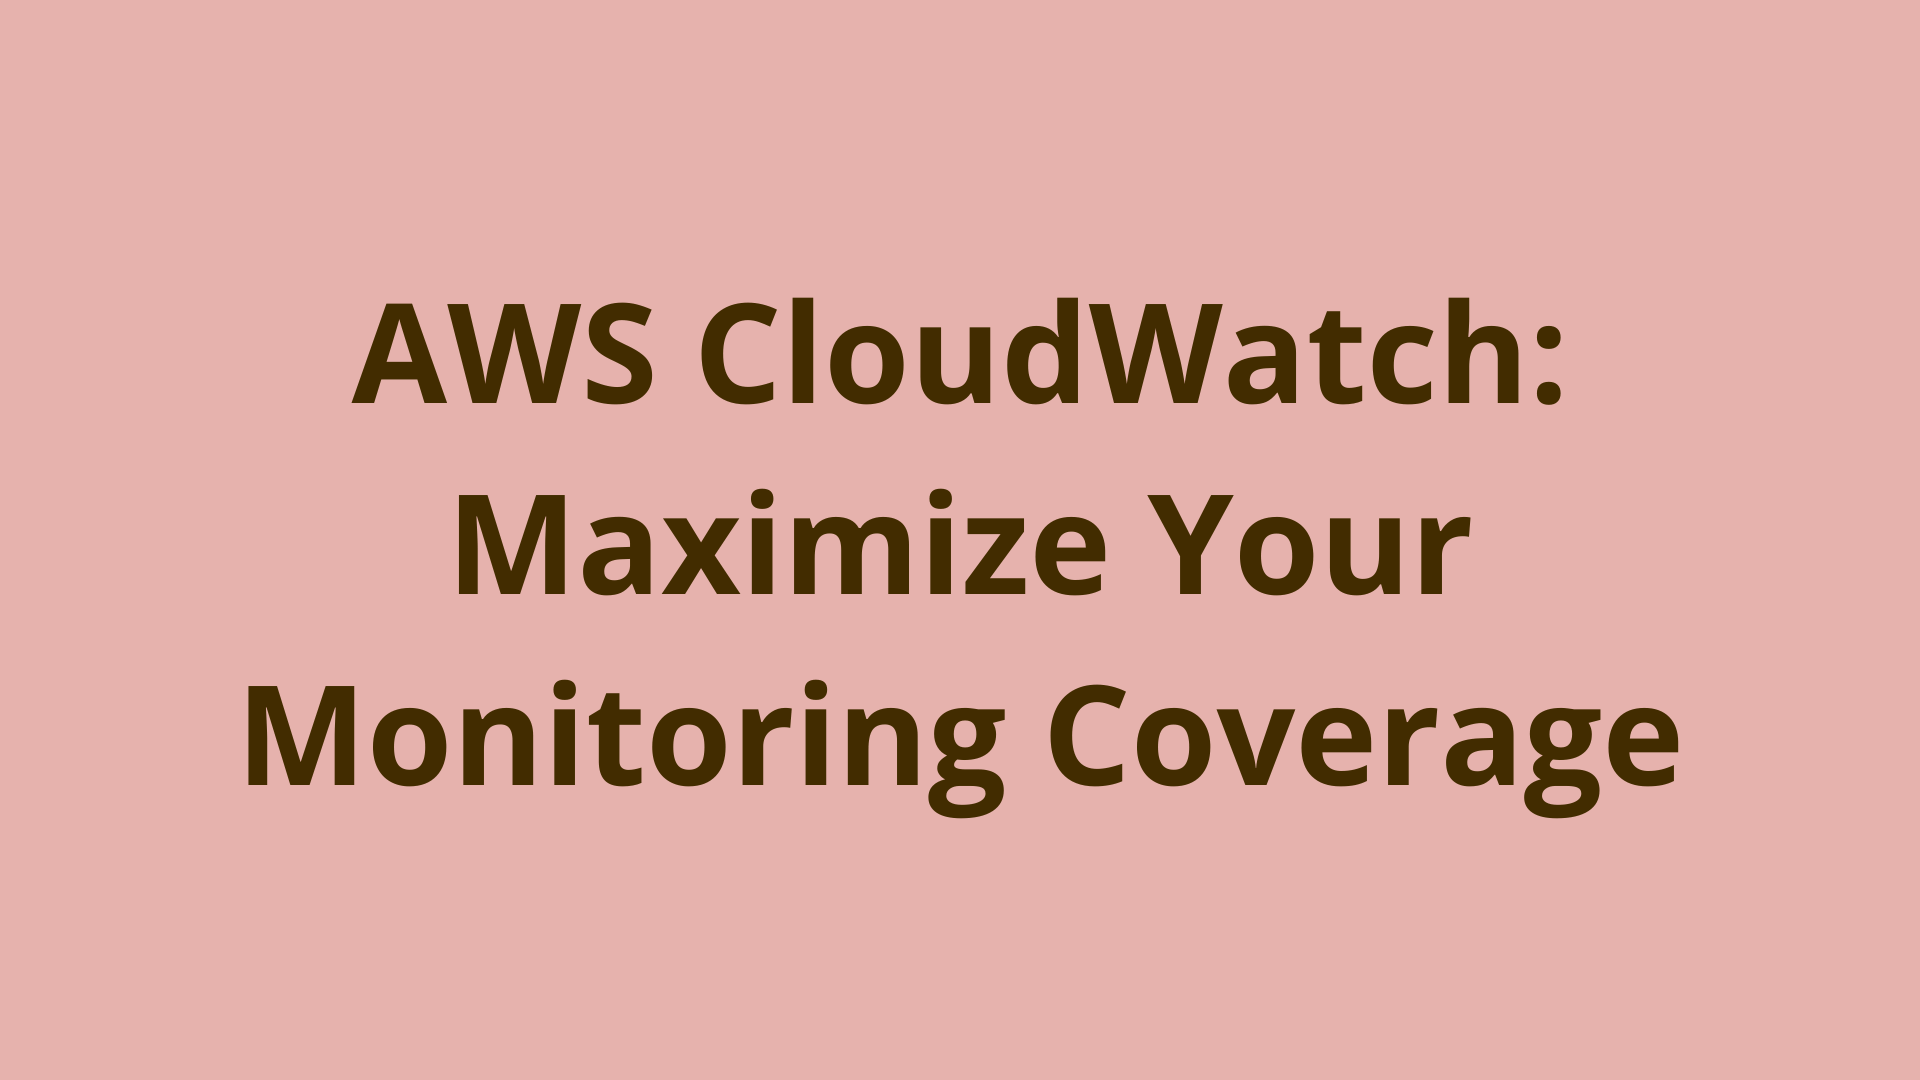 Image of Using AWS CloudWatch to Maximize Your Monitoring Coverage